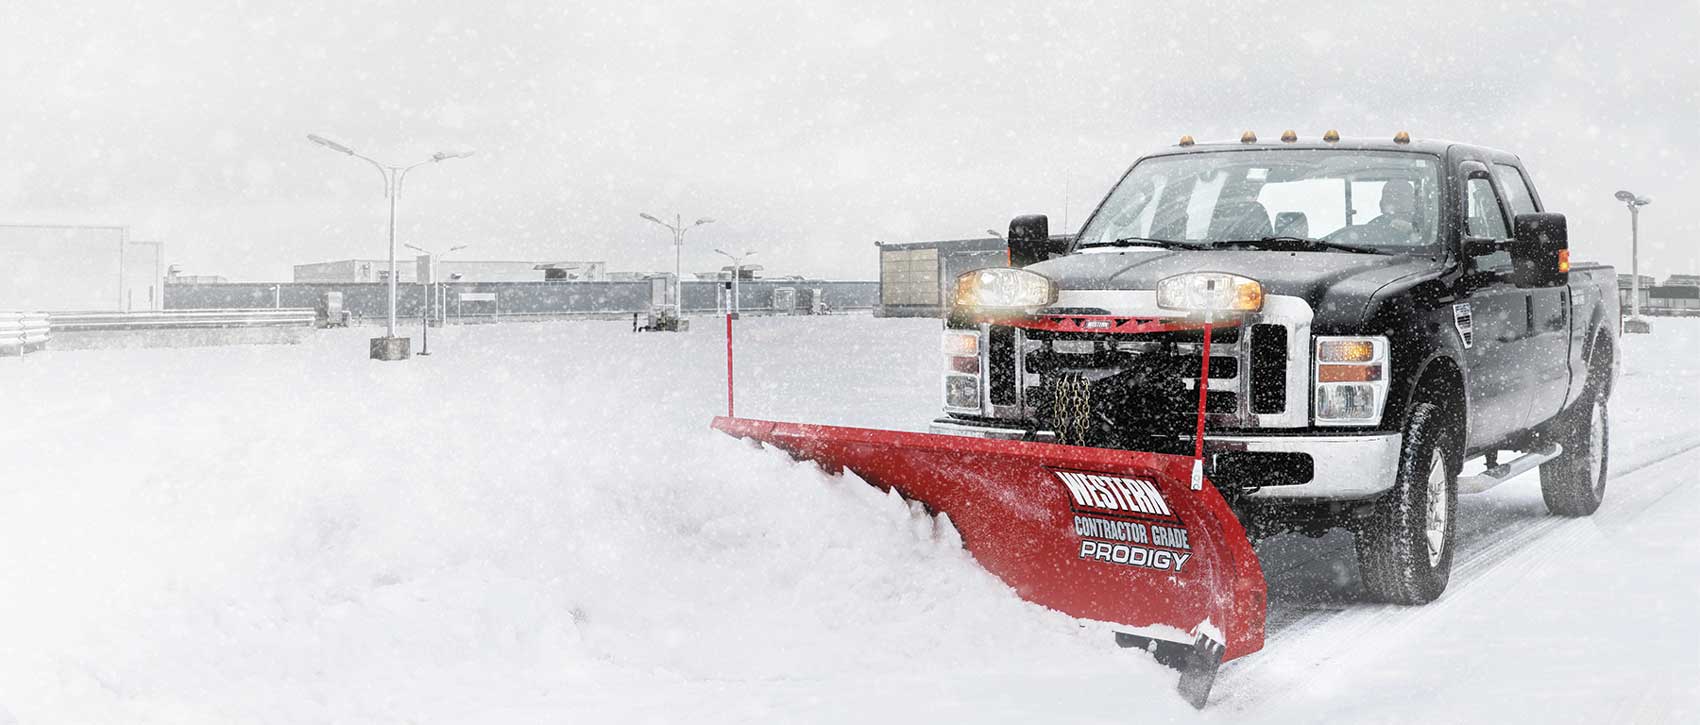 Western Prodigy multi position wing snowplow